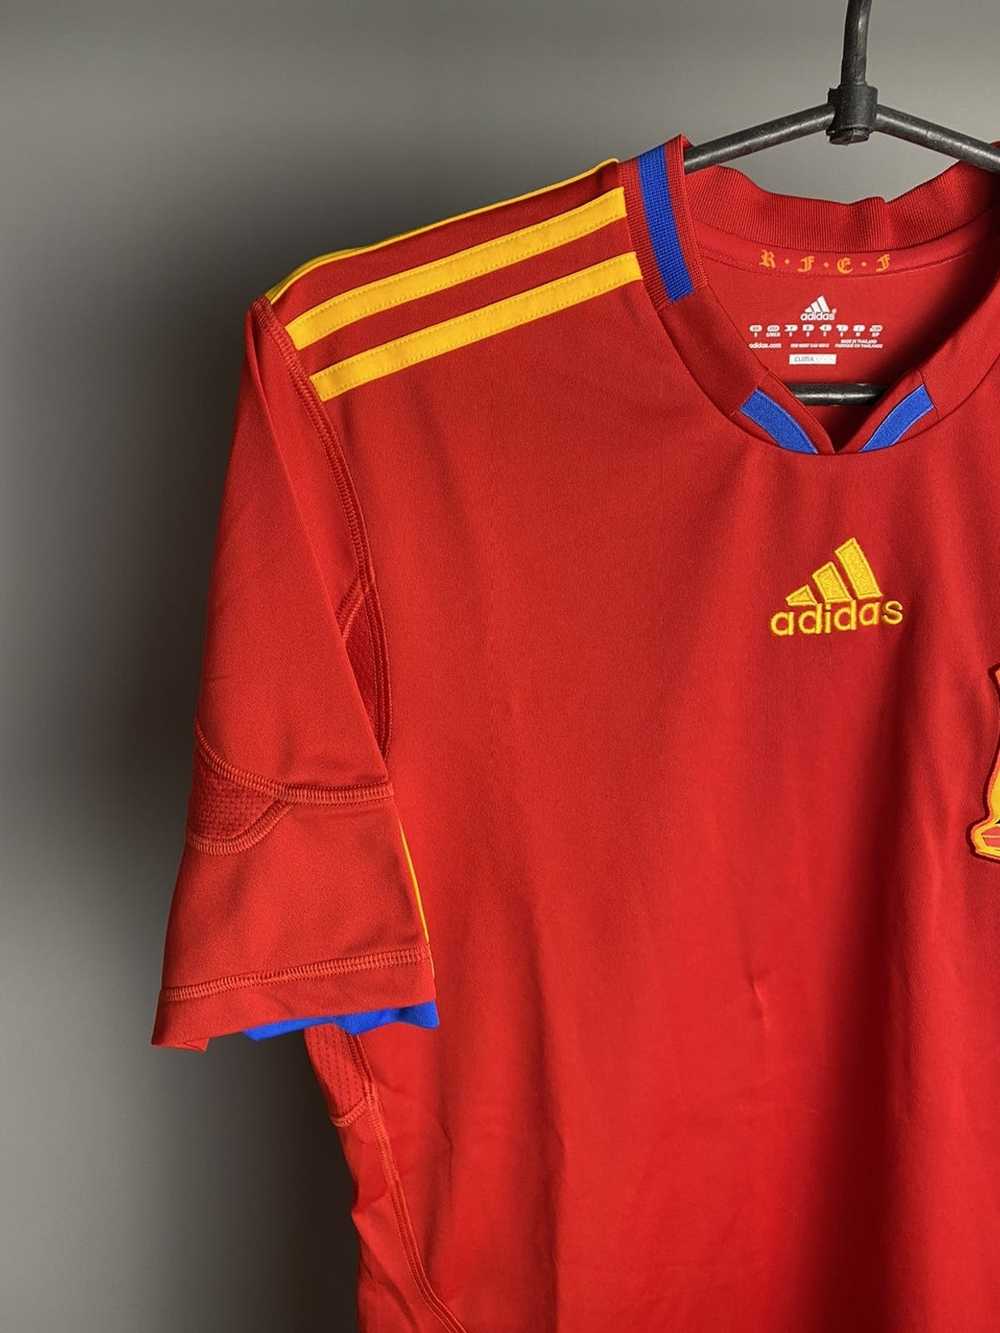 Adidas × Soccer Jersey Spain National Team 2009/2… - image 2